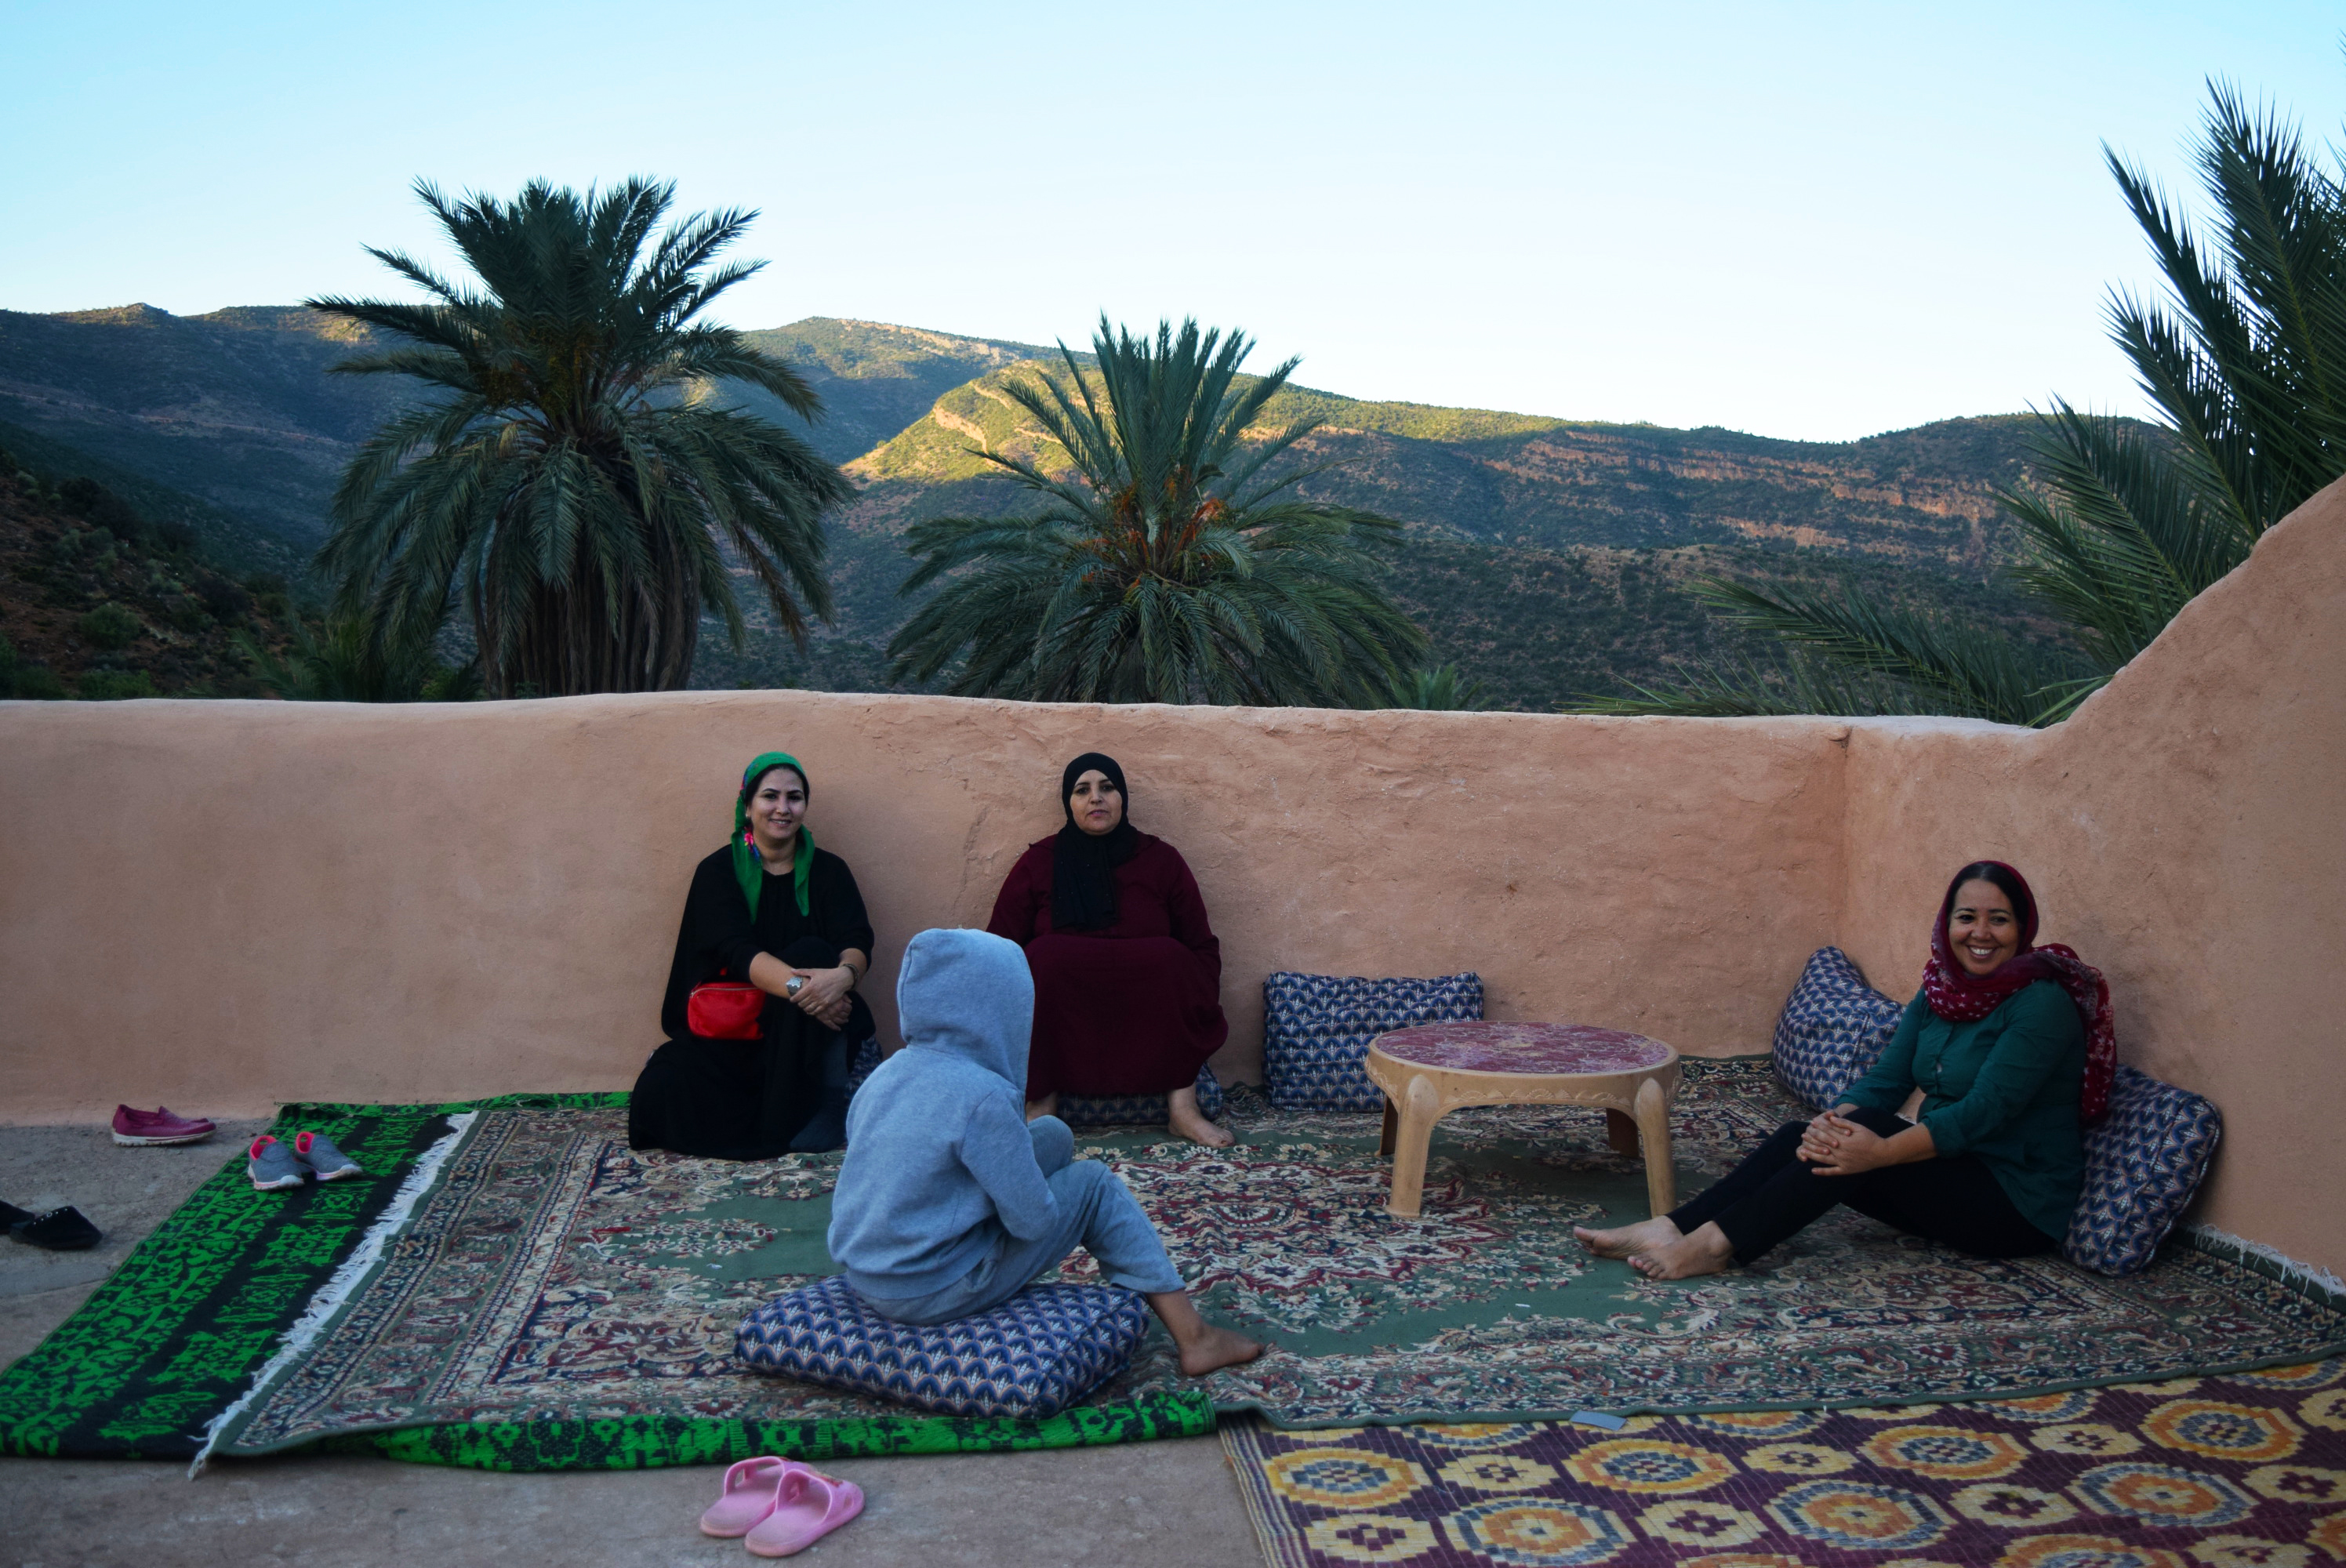 Travelling to Morocco on the quest for sustainable argan oil